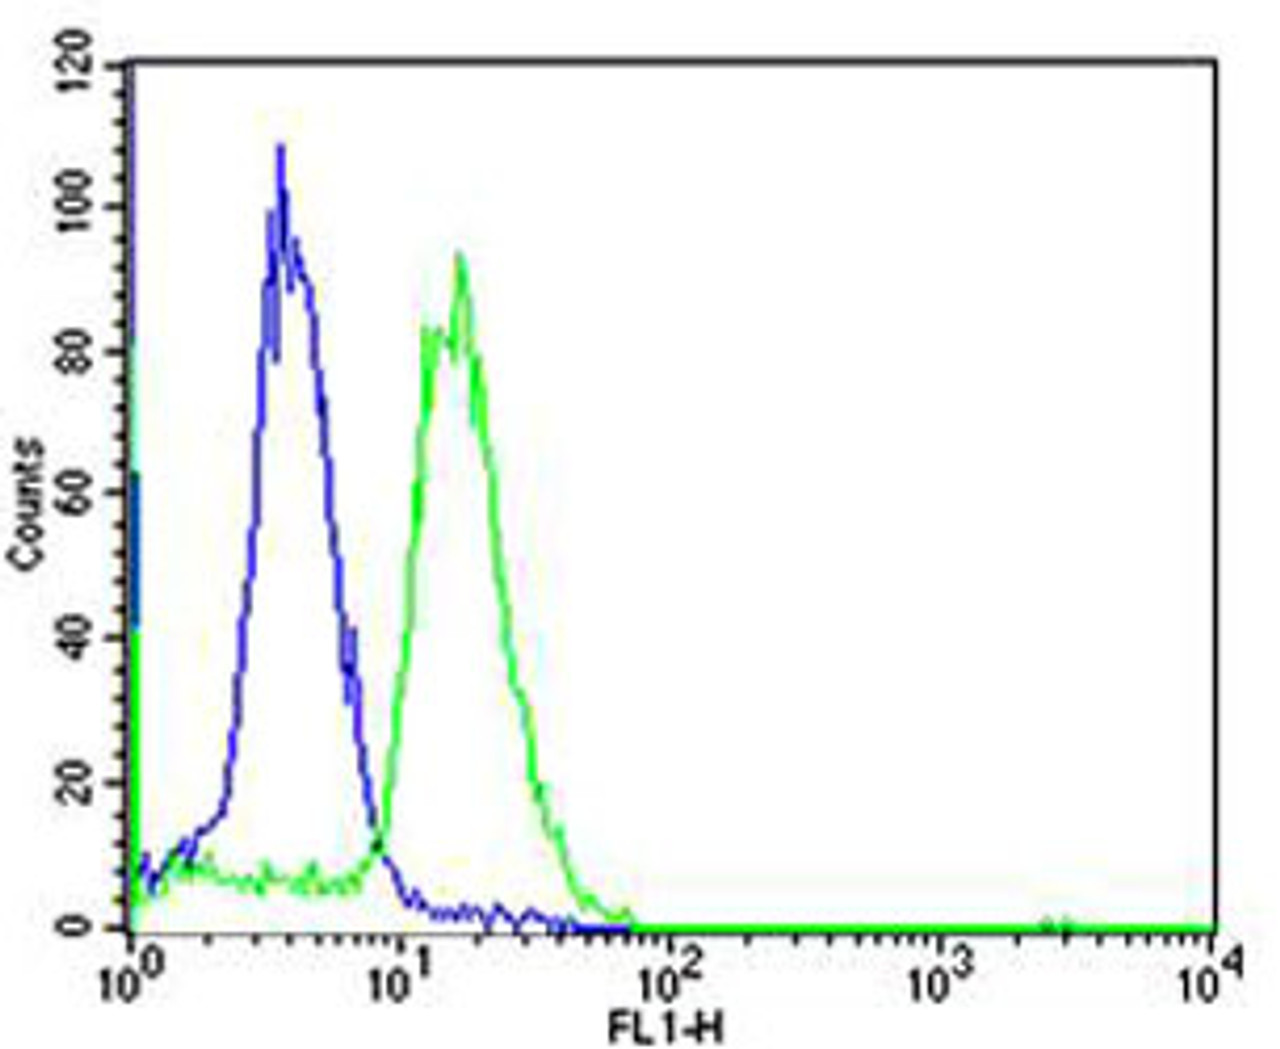 Flow cytometric analysis of Ramos cells using TCL1A Antibody (green) compared to an isotype control of rabbit IgG (blue) . Antibody was diluted at 1:25 dilution. An Alexa Fluor 488 goat anti-rabbit lgG at 1:400 dilution was used as the secondary antibody.